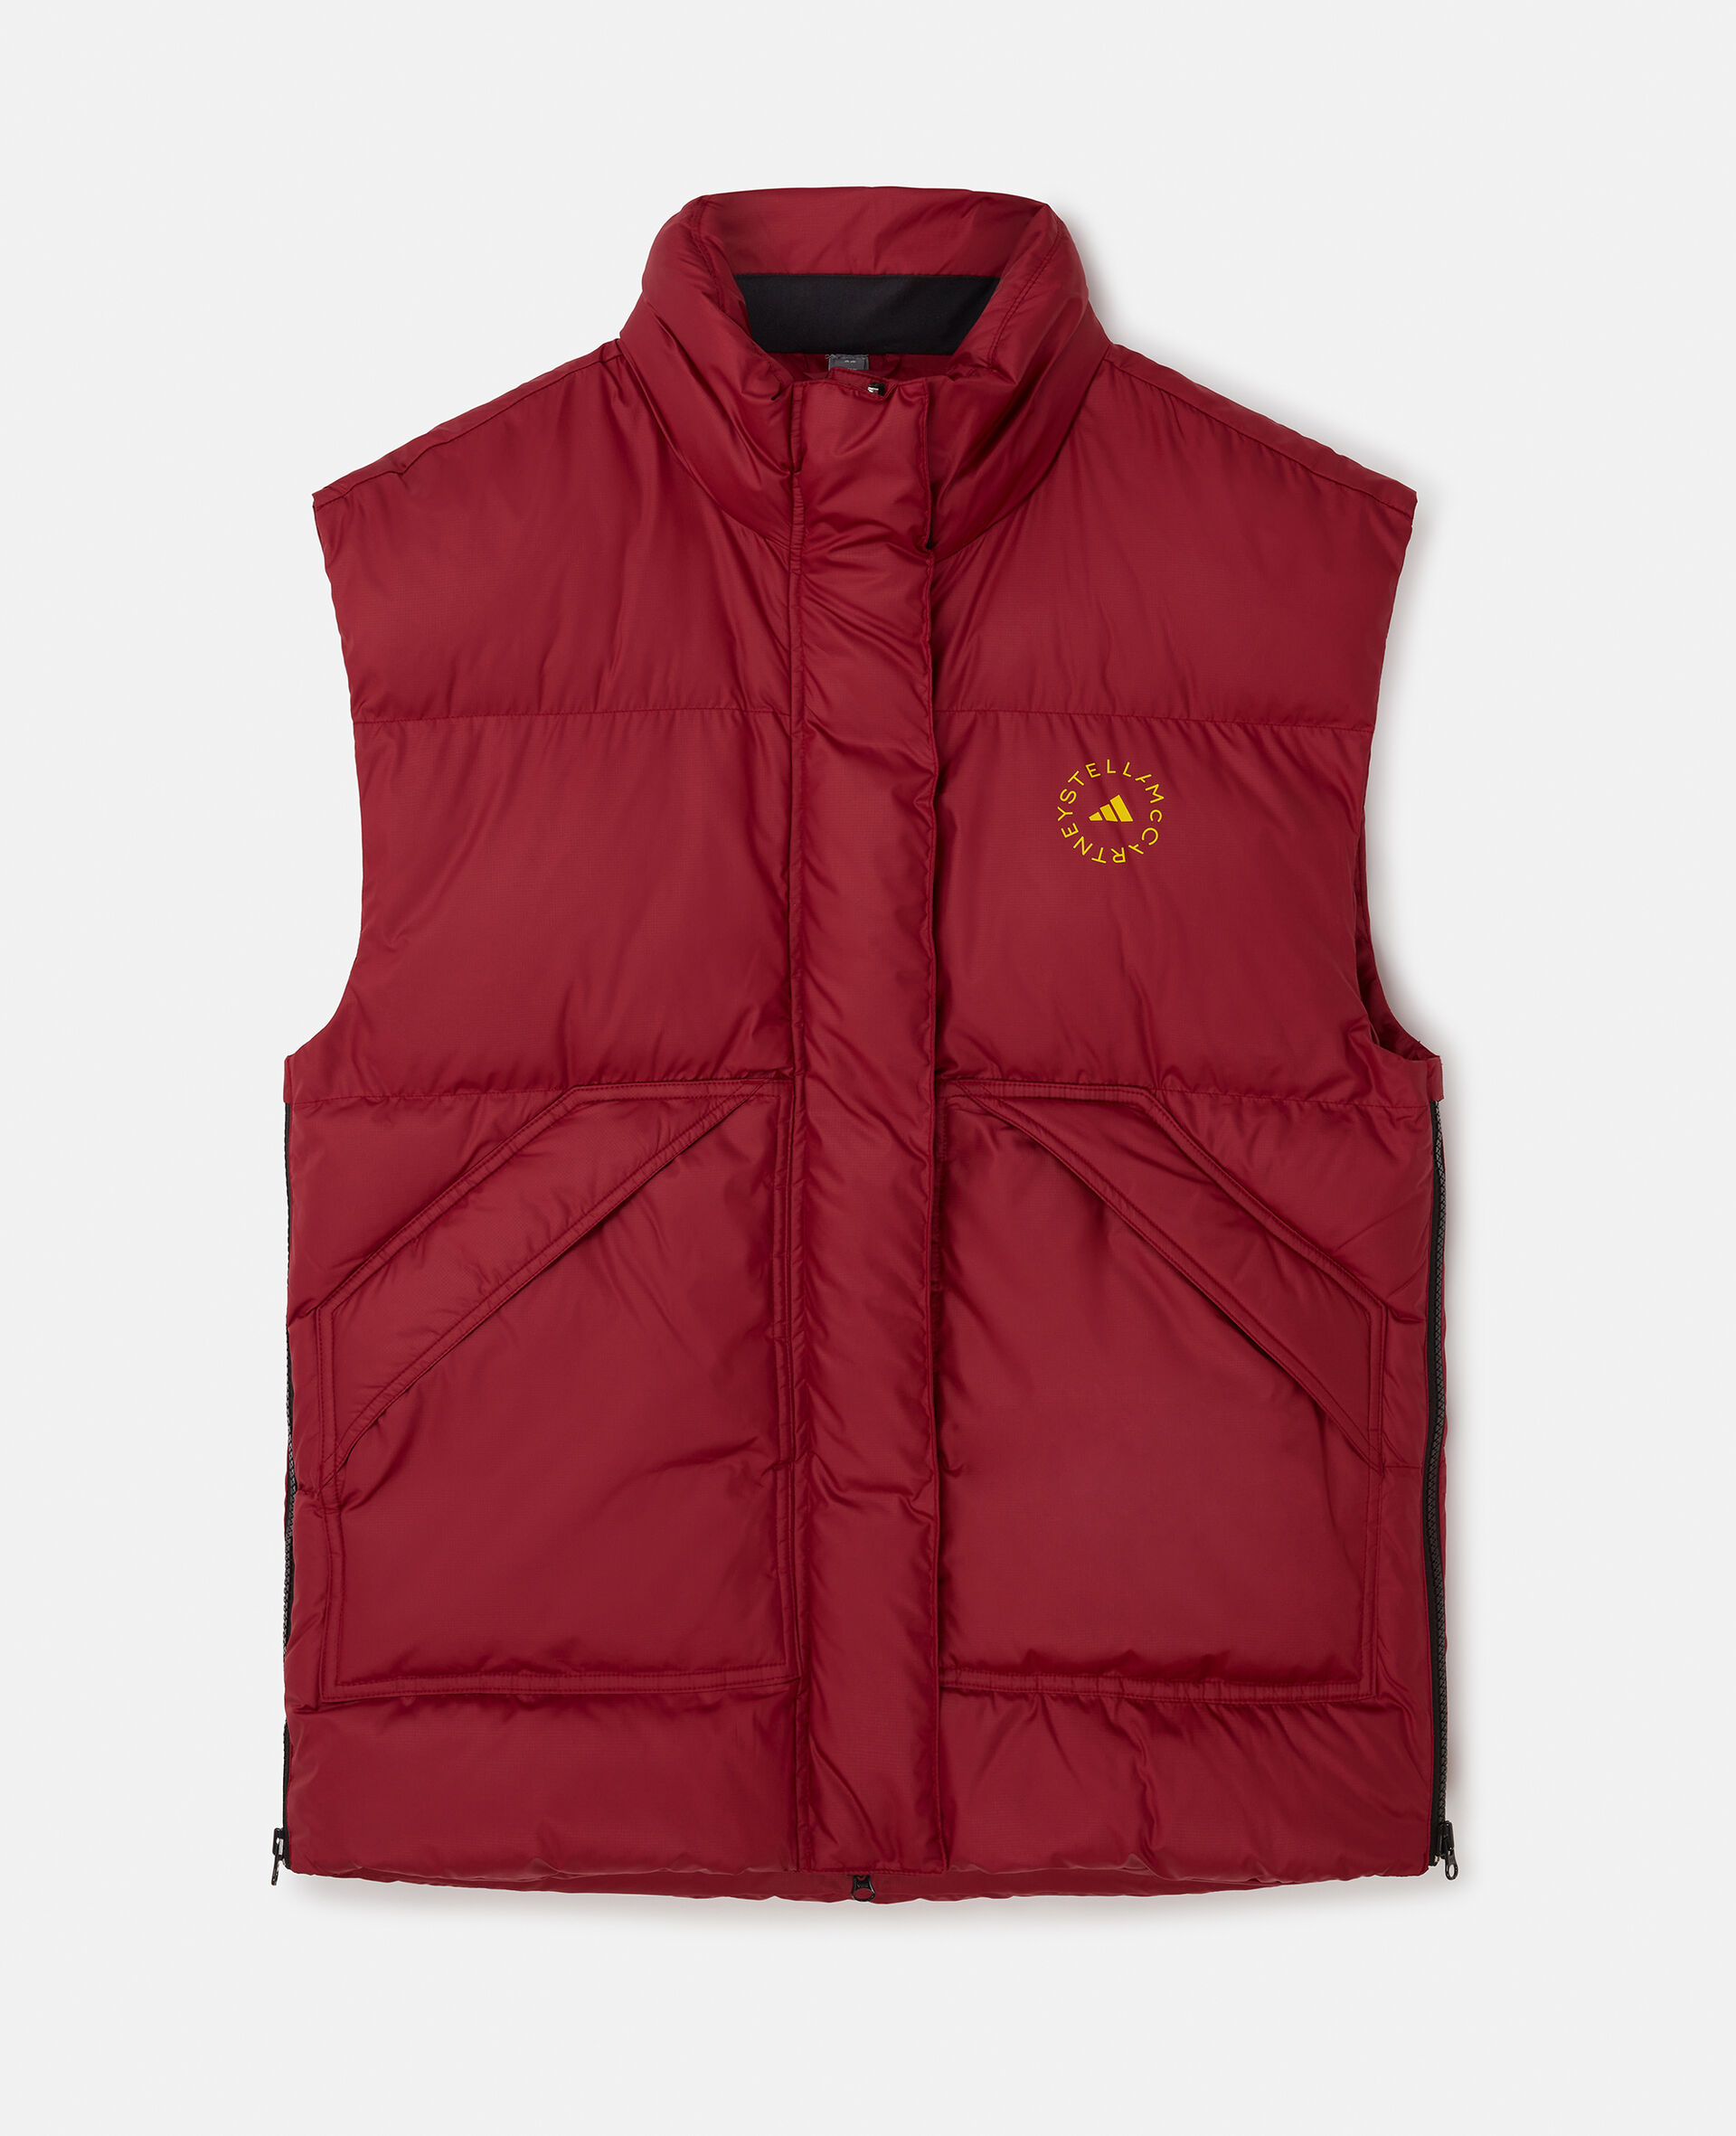 Gilet invernale imbottito-Rosso-large image number 0